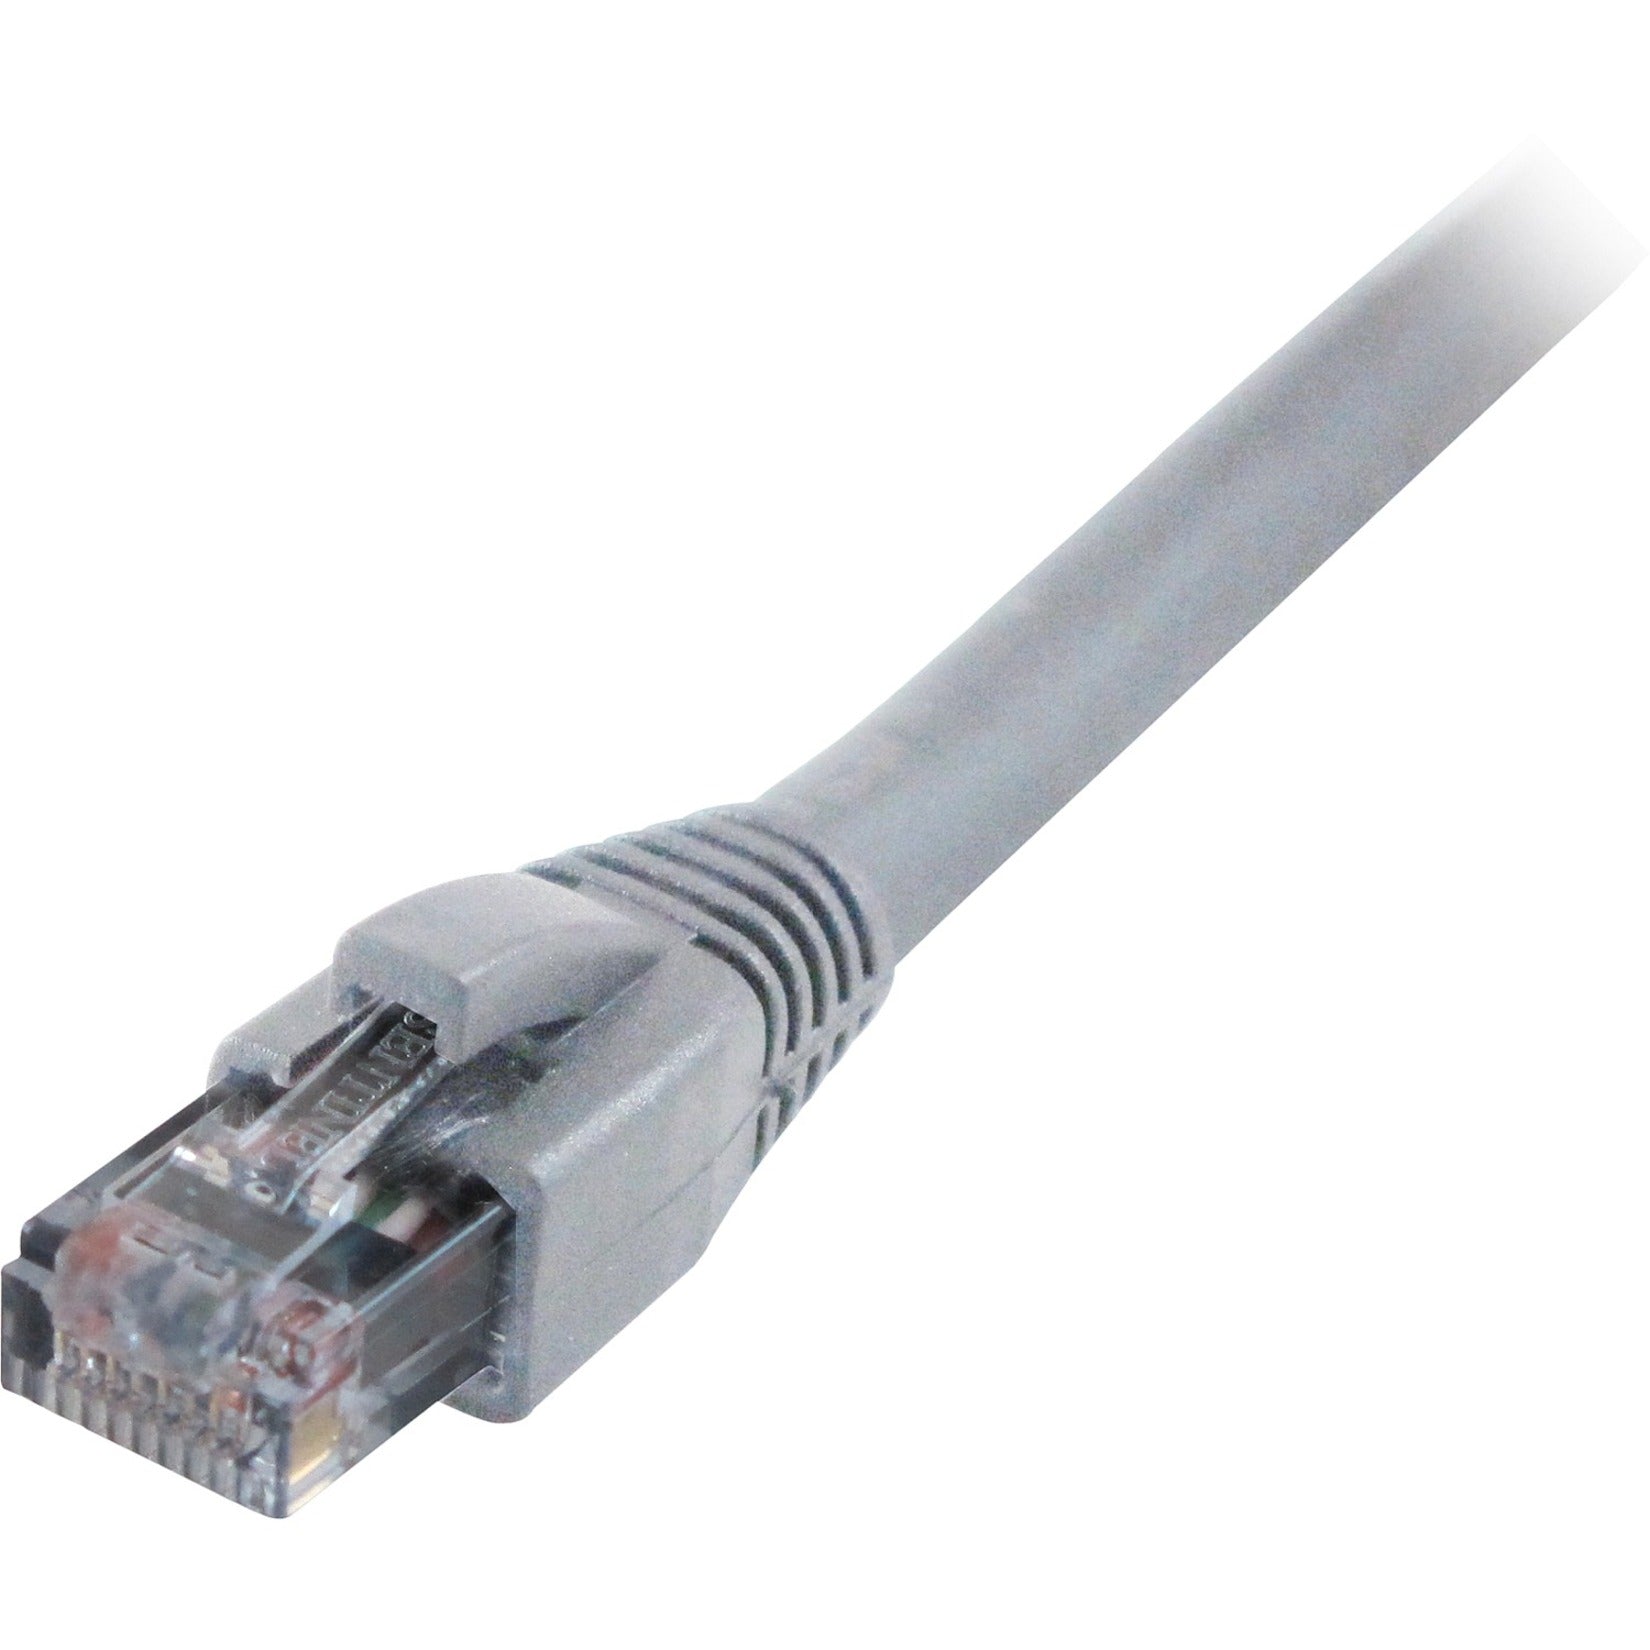 Comprehensive CAT5-350-50GRY Cat5e 350 Mhz Snagless Patch Cable 50ft Gray, Molded, Strain Relief, Stranded, Booted, 1 Gbit/s